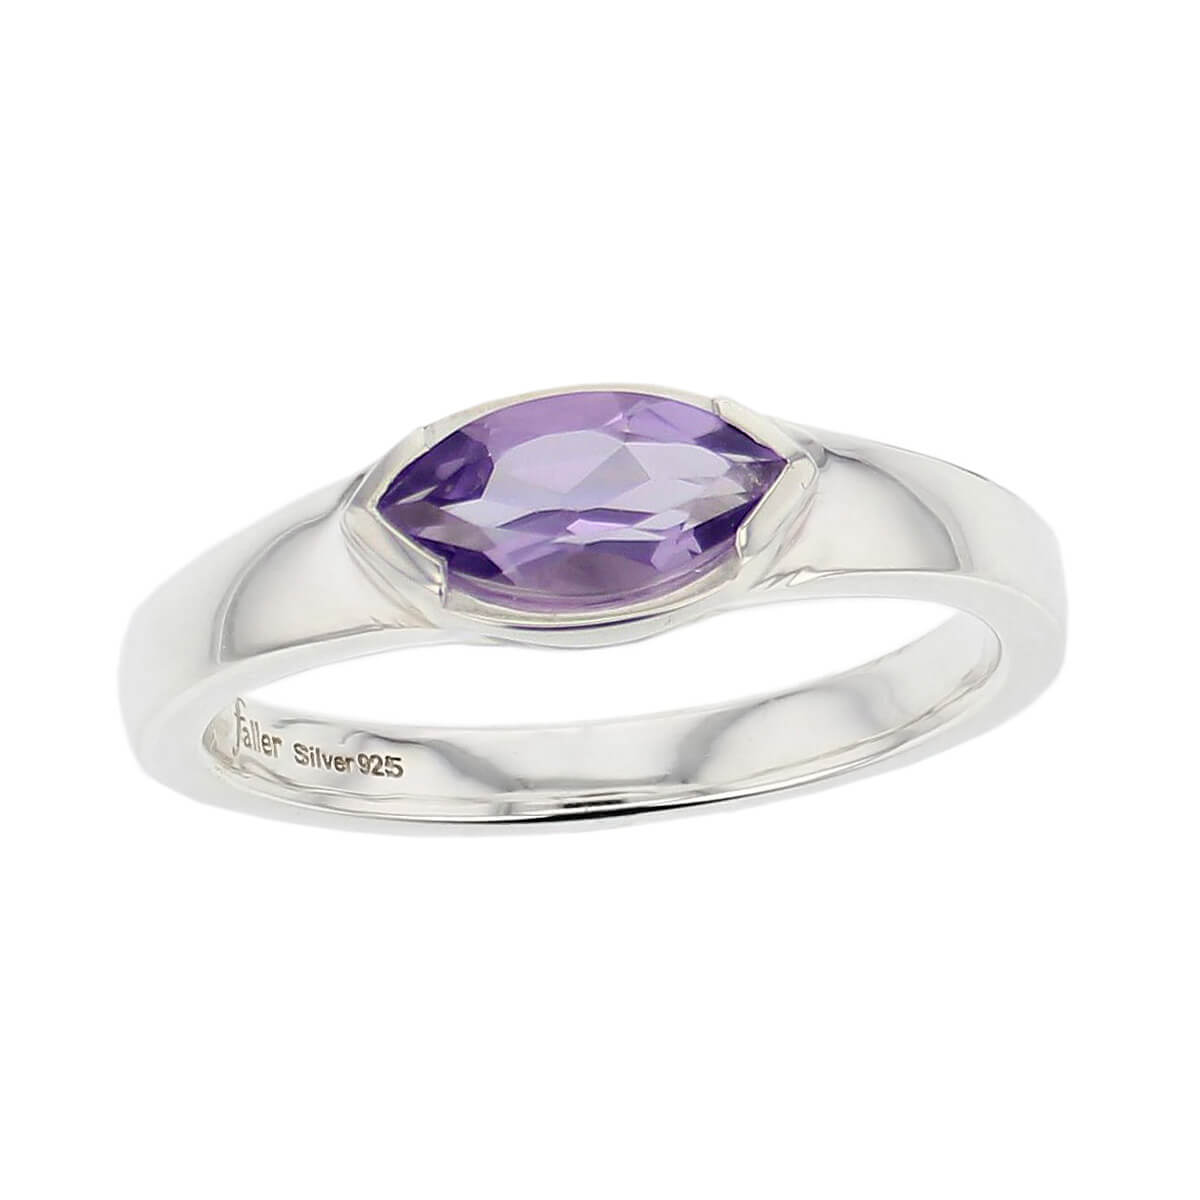 sterling silver purple marquise cut faceted amethyst gemstone dress ring, designer jewellery, quartz gem, jewelry, handmade by Faller, Londonderry, Northern Ireland, Irish hand crafted, darcy, D’arcy, navette